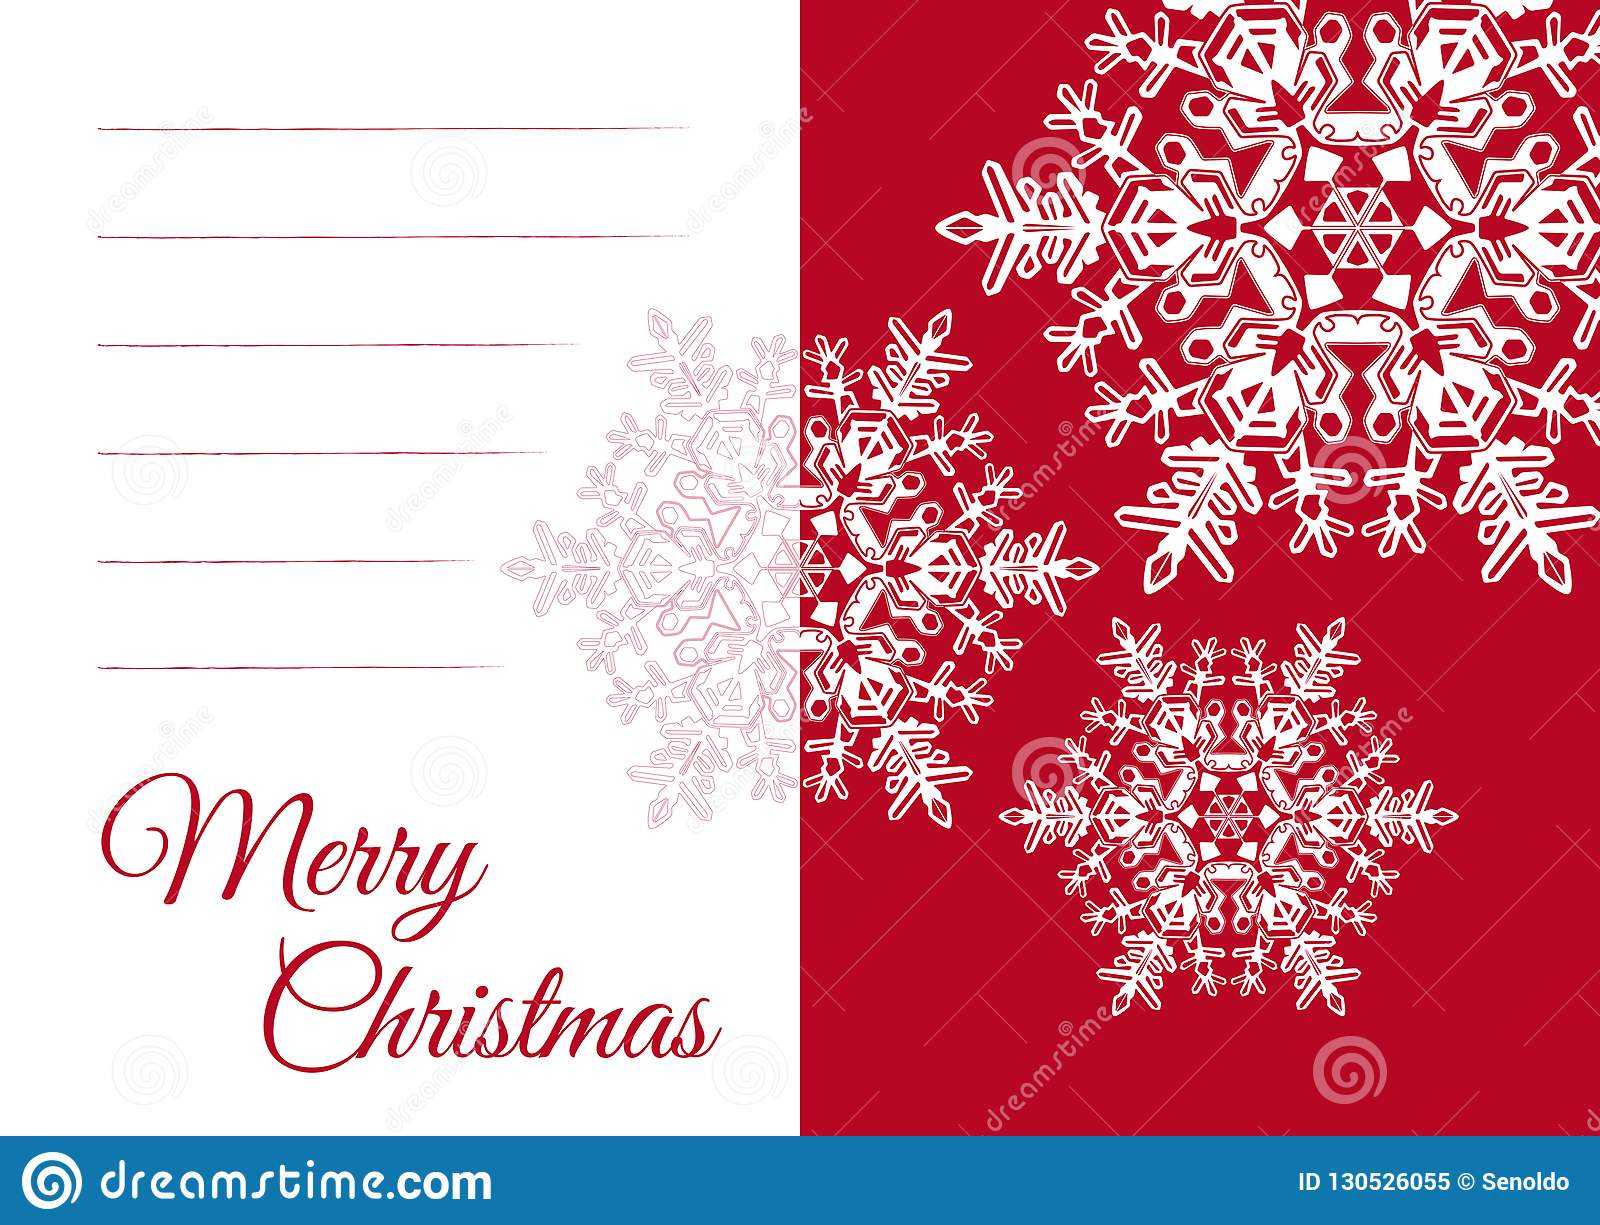 christmas-greeting-card-template-with-blank-text-field-stock-with